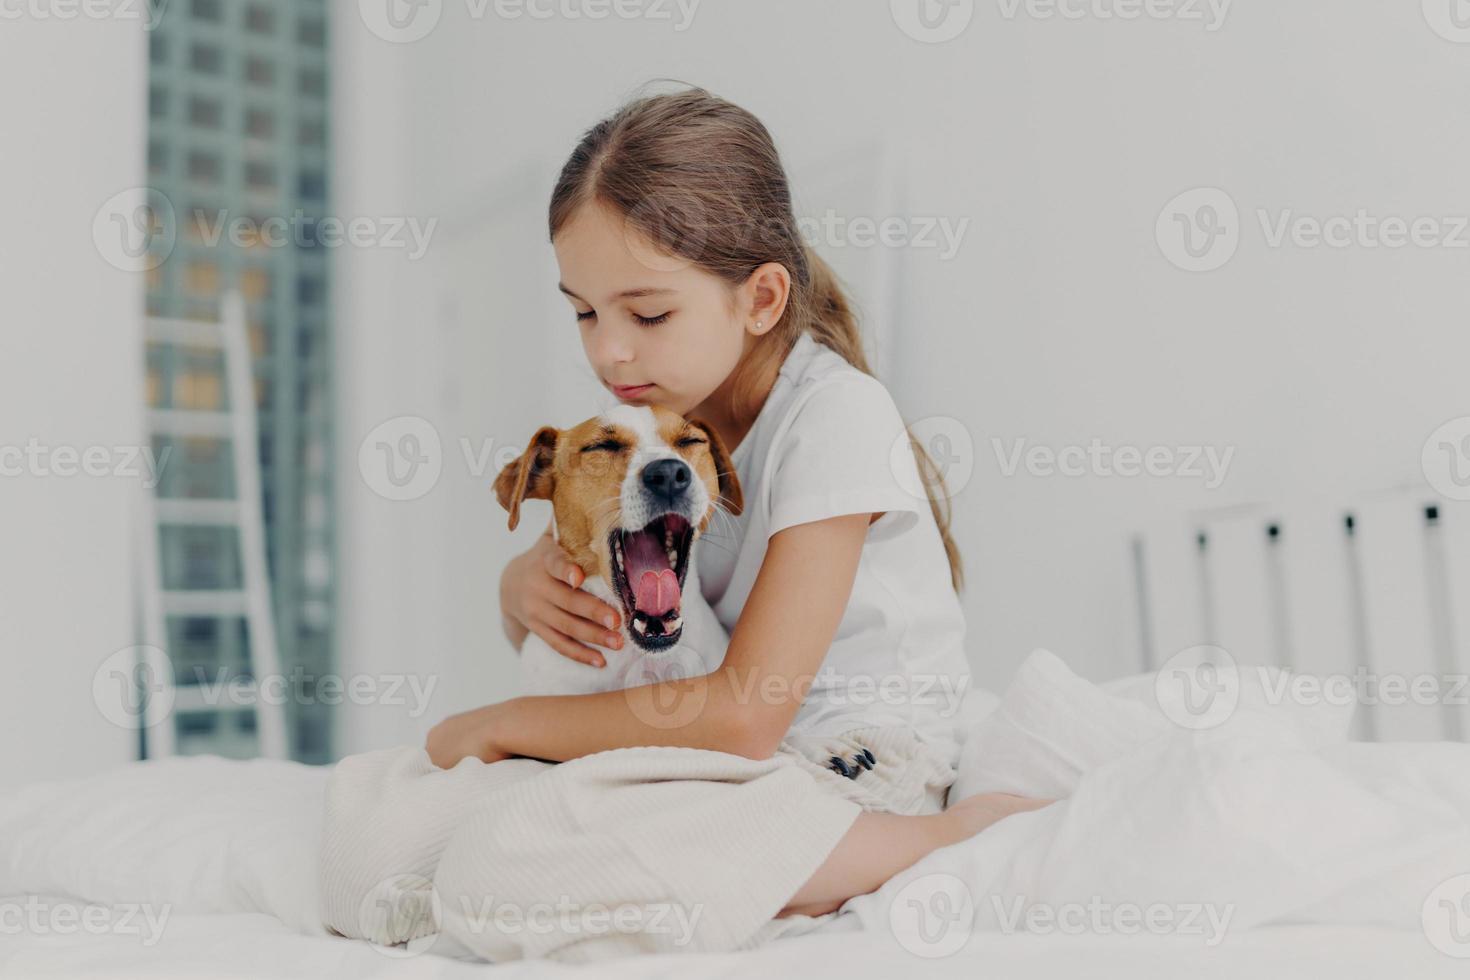 Fair haired small girl with pony tail wears casual pyjamas, embraces dog who yawns, pose together on comfortable bed, expresses love and care to domestic animal, spends morning weekend at home photo